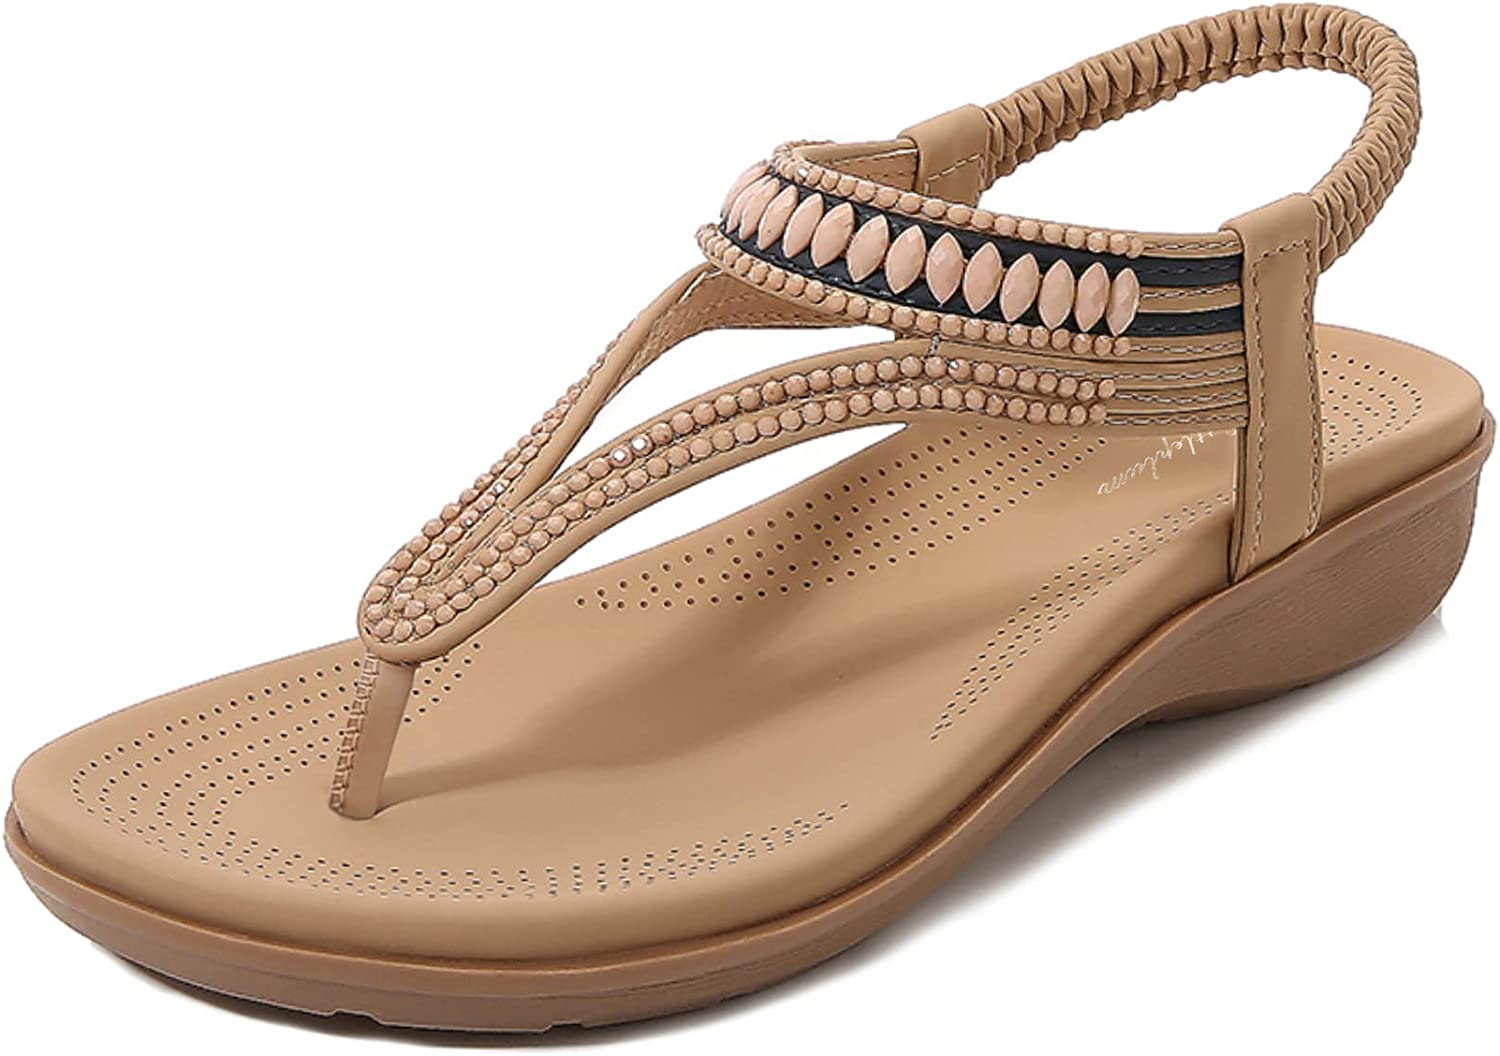 Zullaz Ella Orthotic Sandal - arch support and cushioning footbed!